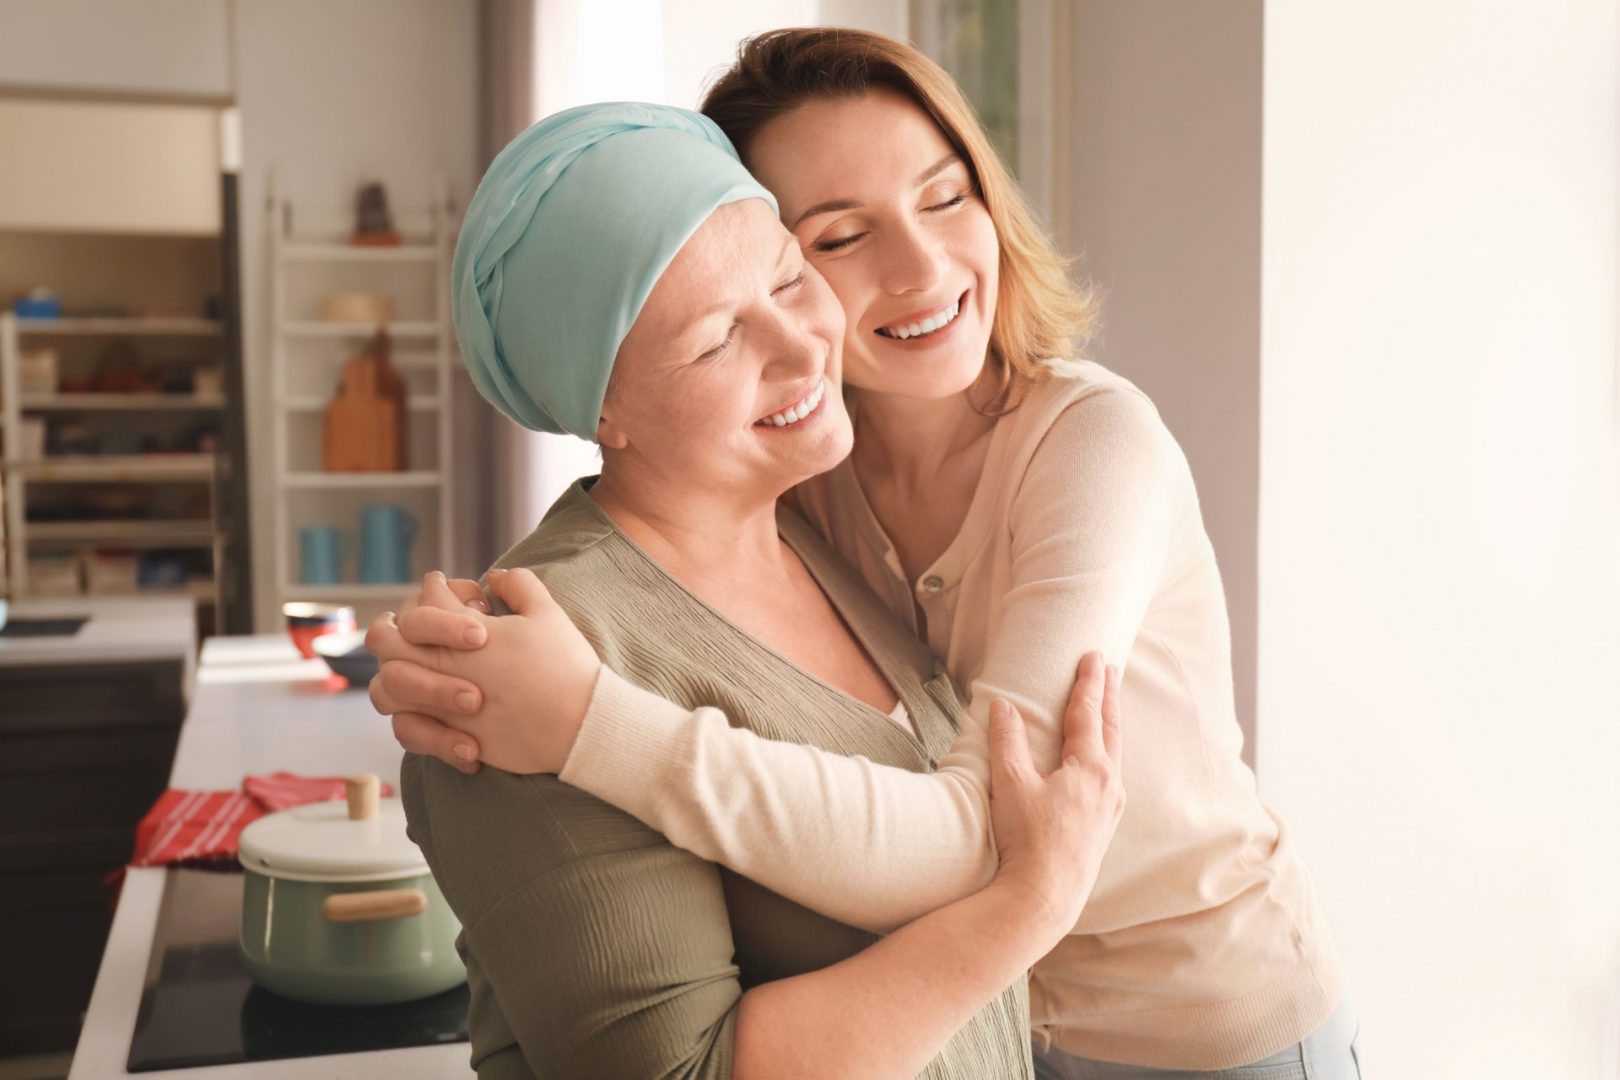 Cancer Care
Cancer care, in your own home
